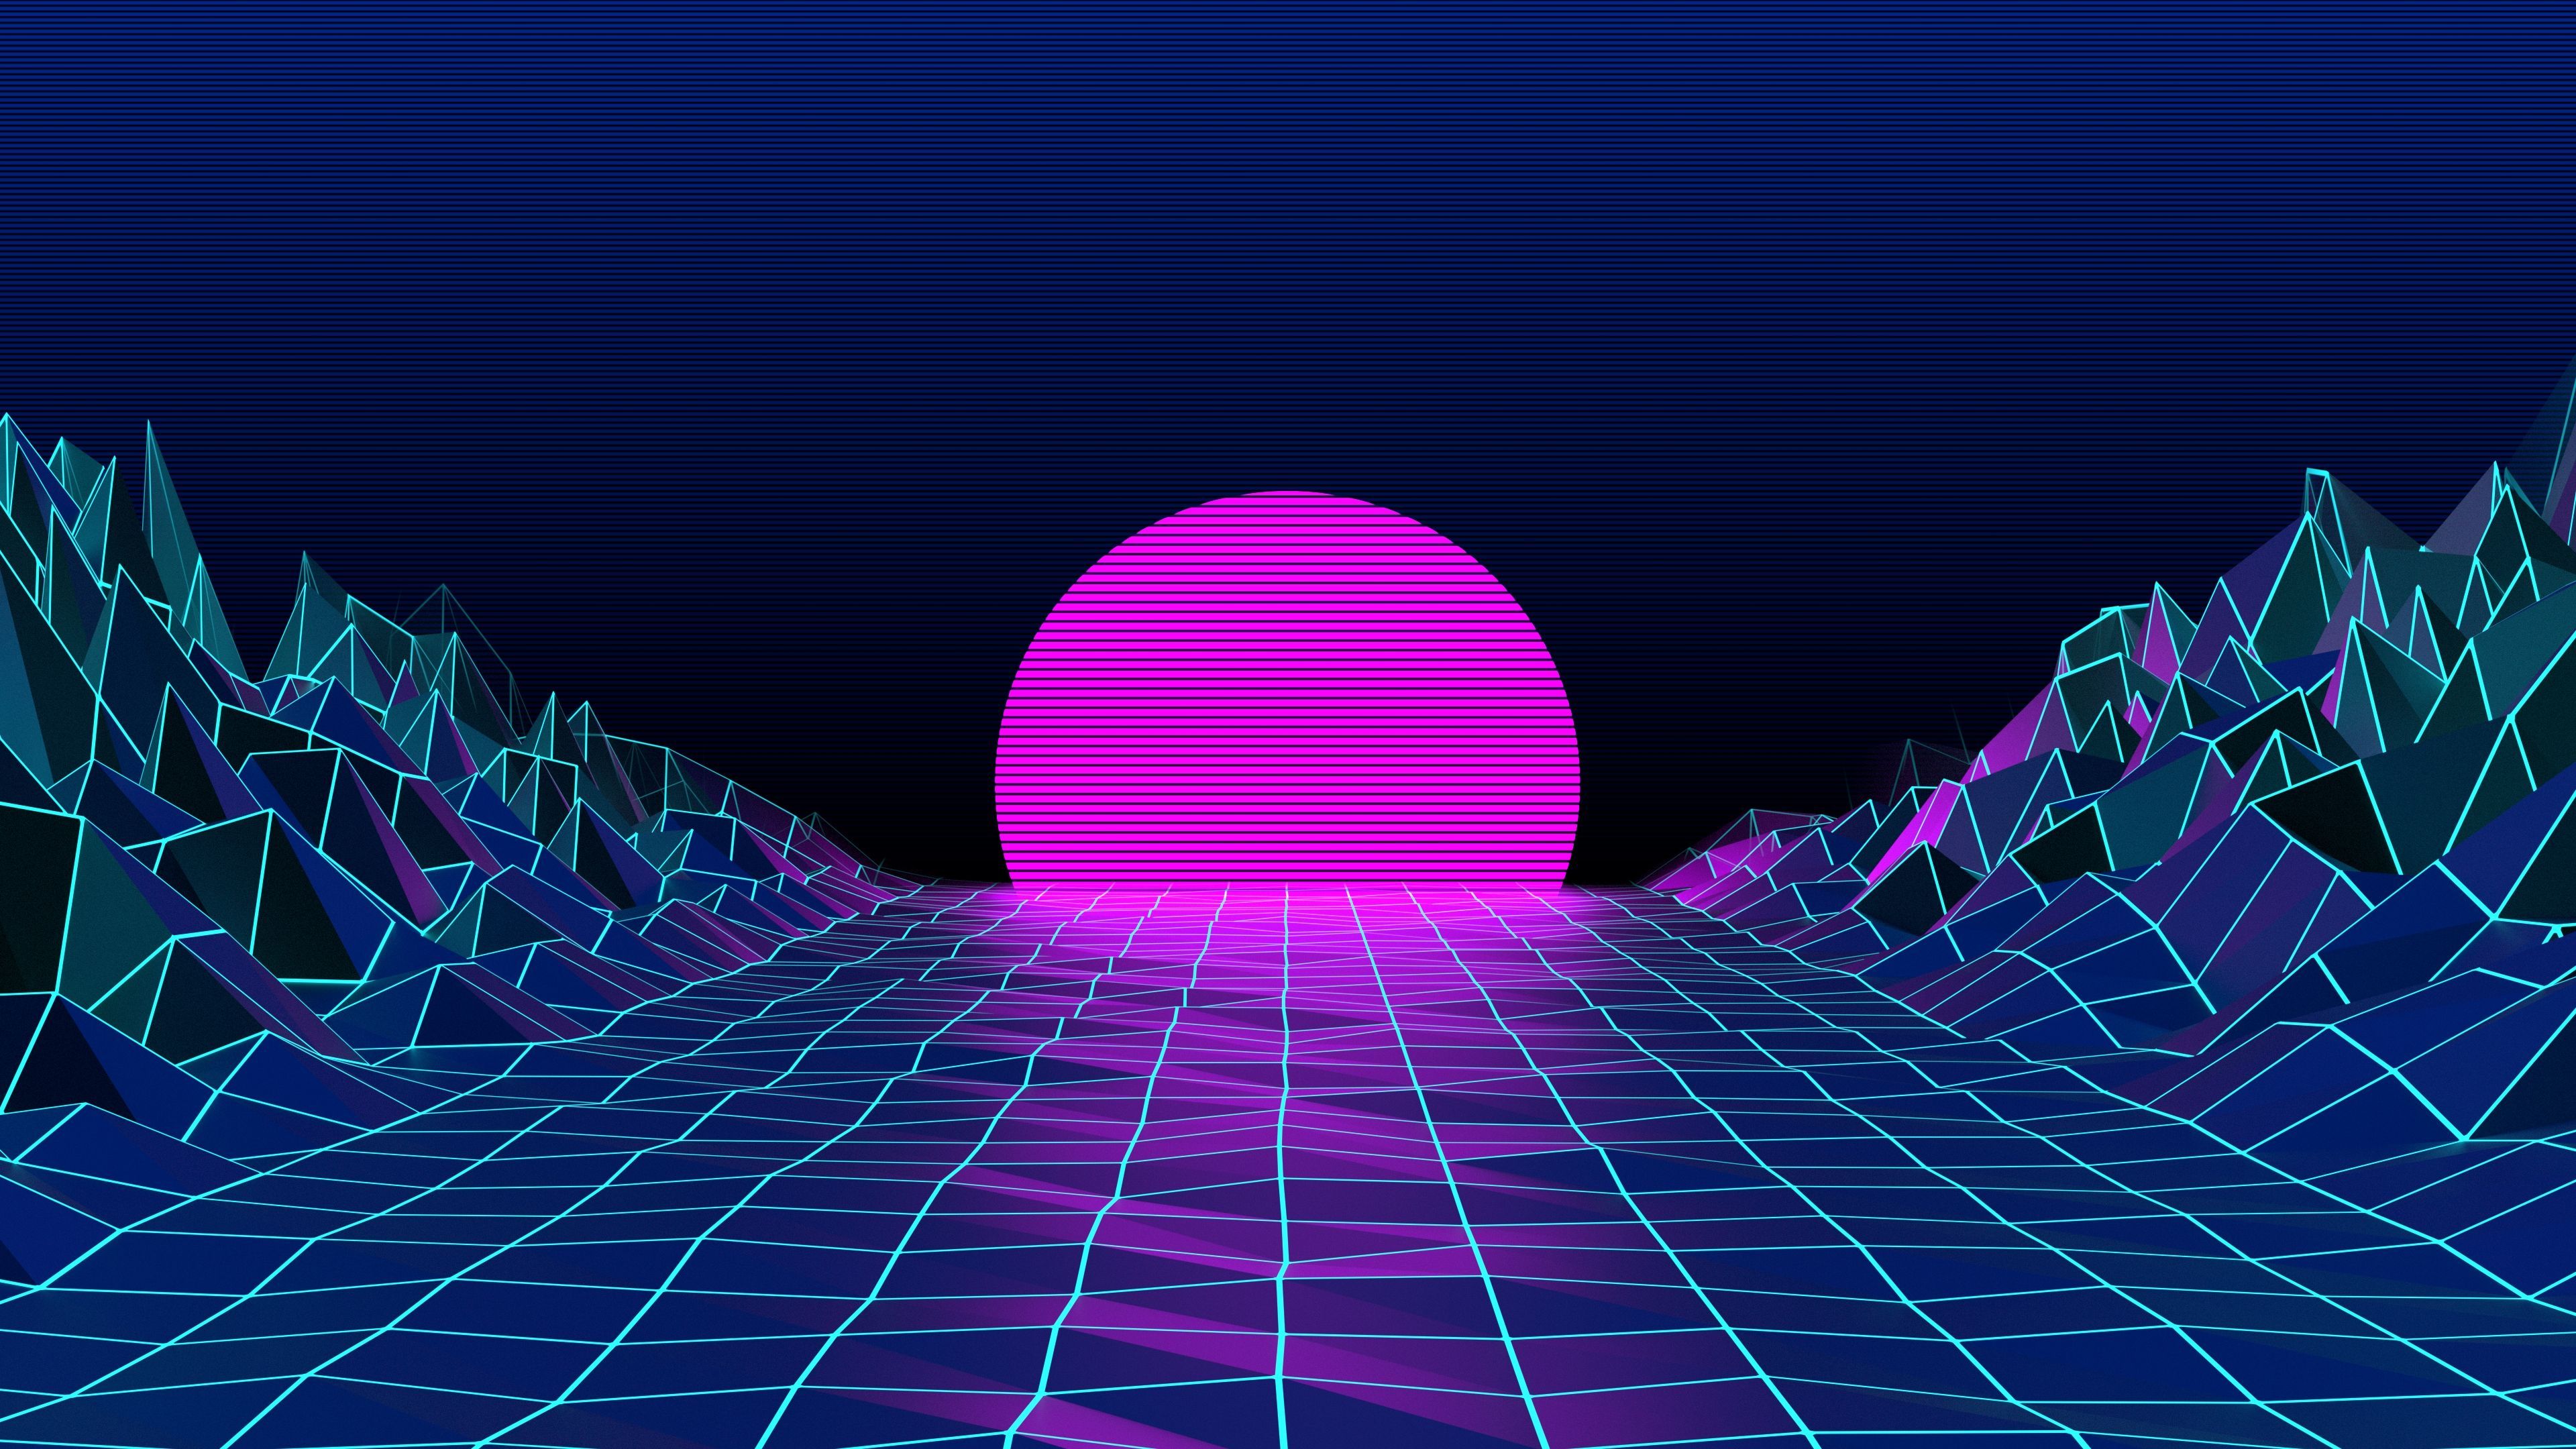 A neon pink light in the middle of an abstract landscape - 3840x2160, lo fi, Windows 10, VHS